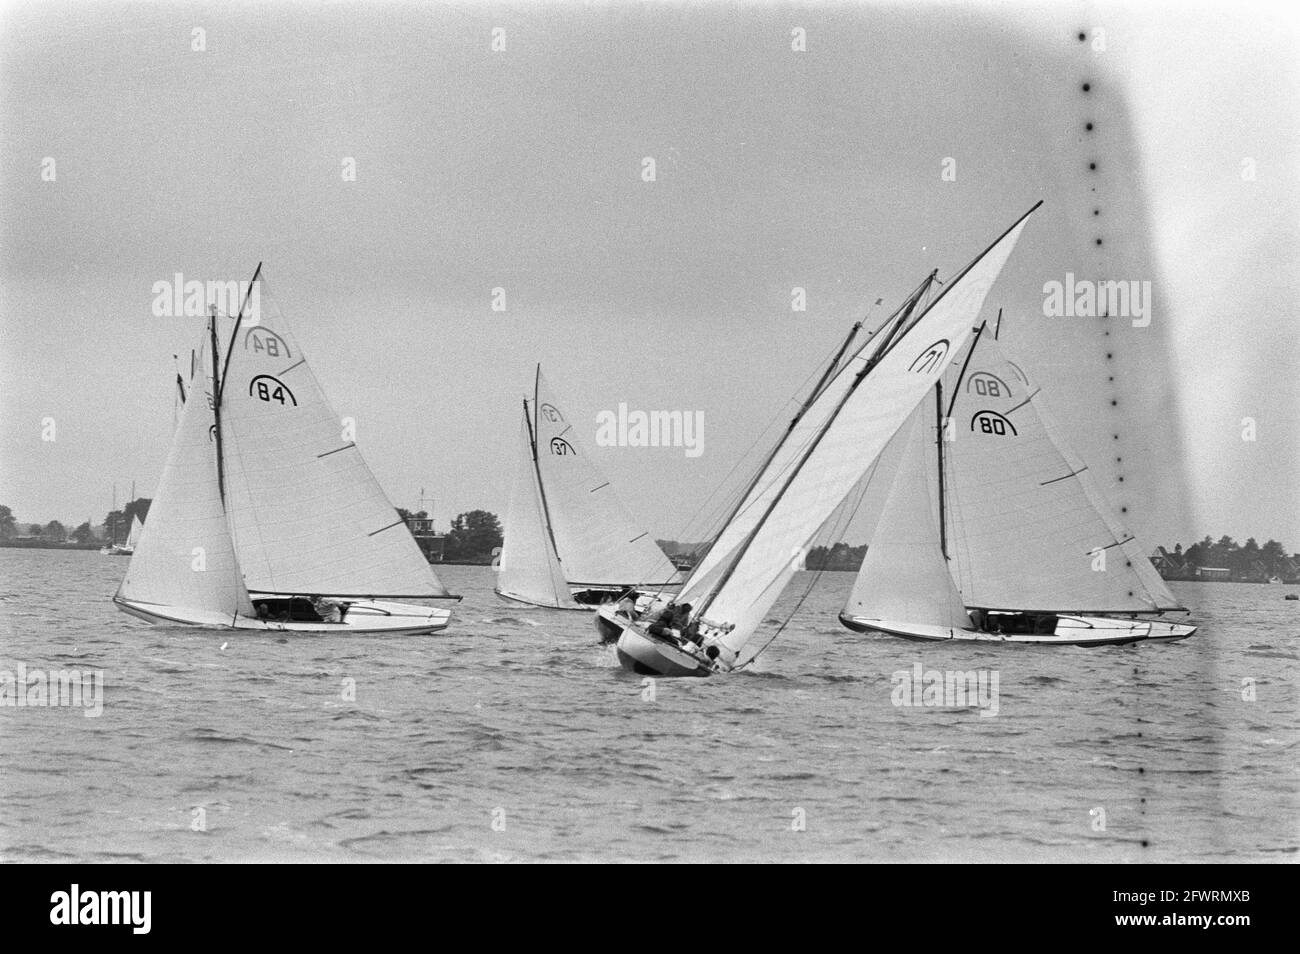 Dutch Championships Rainbow Class sailing on Alkmaardermeer; overview of races, July 19, 1970, CHAMPIONSHIPS, RACING, Sailing, The Netherlands, 20th century press agency photo, news to remember, documentary, historic photography 1945-1990, visual stories, human history of the Twentieth Century, capturing moments in time Stock Photo